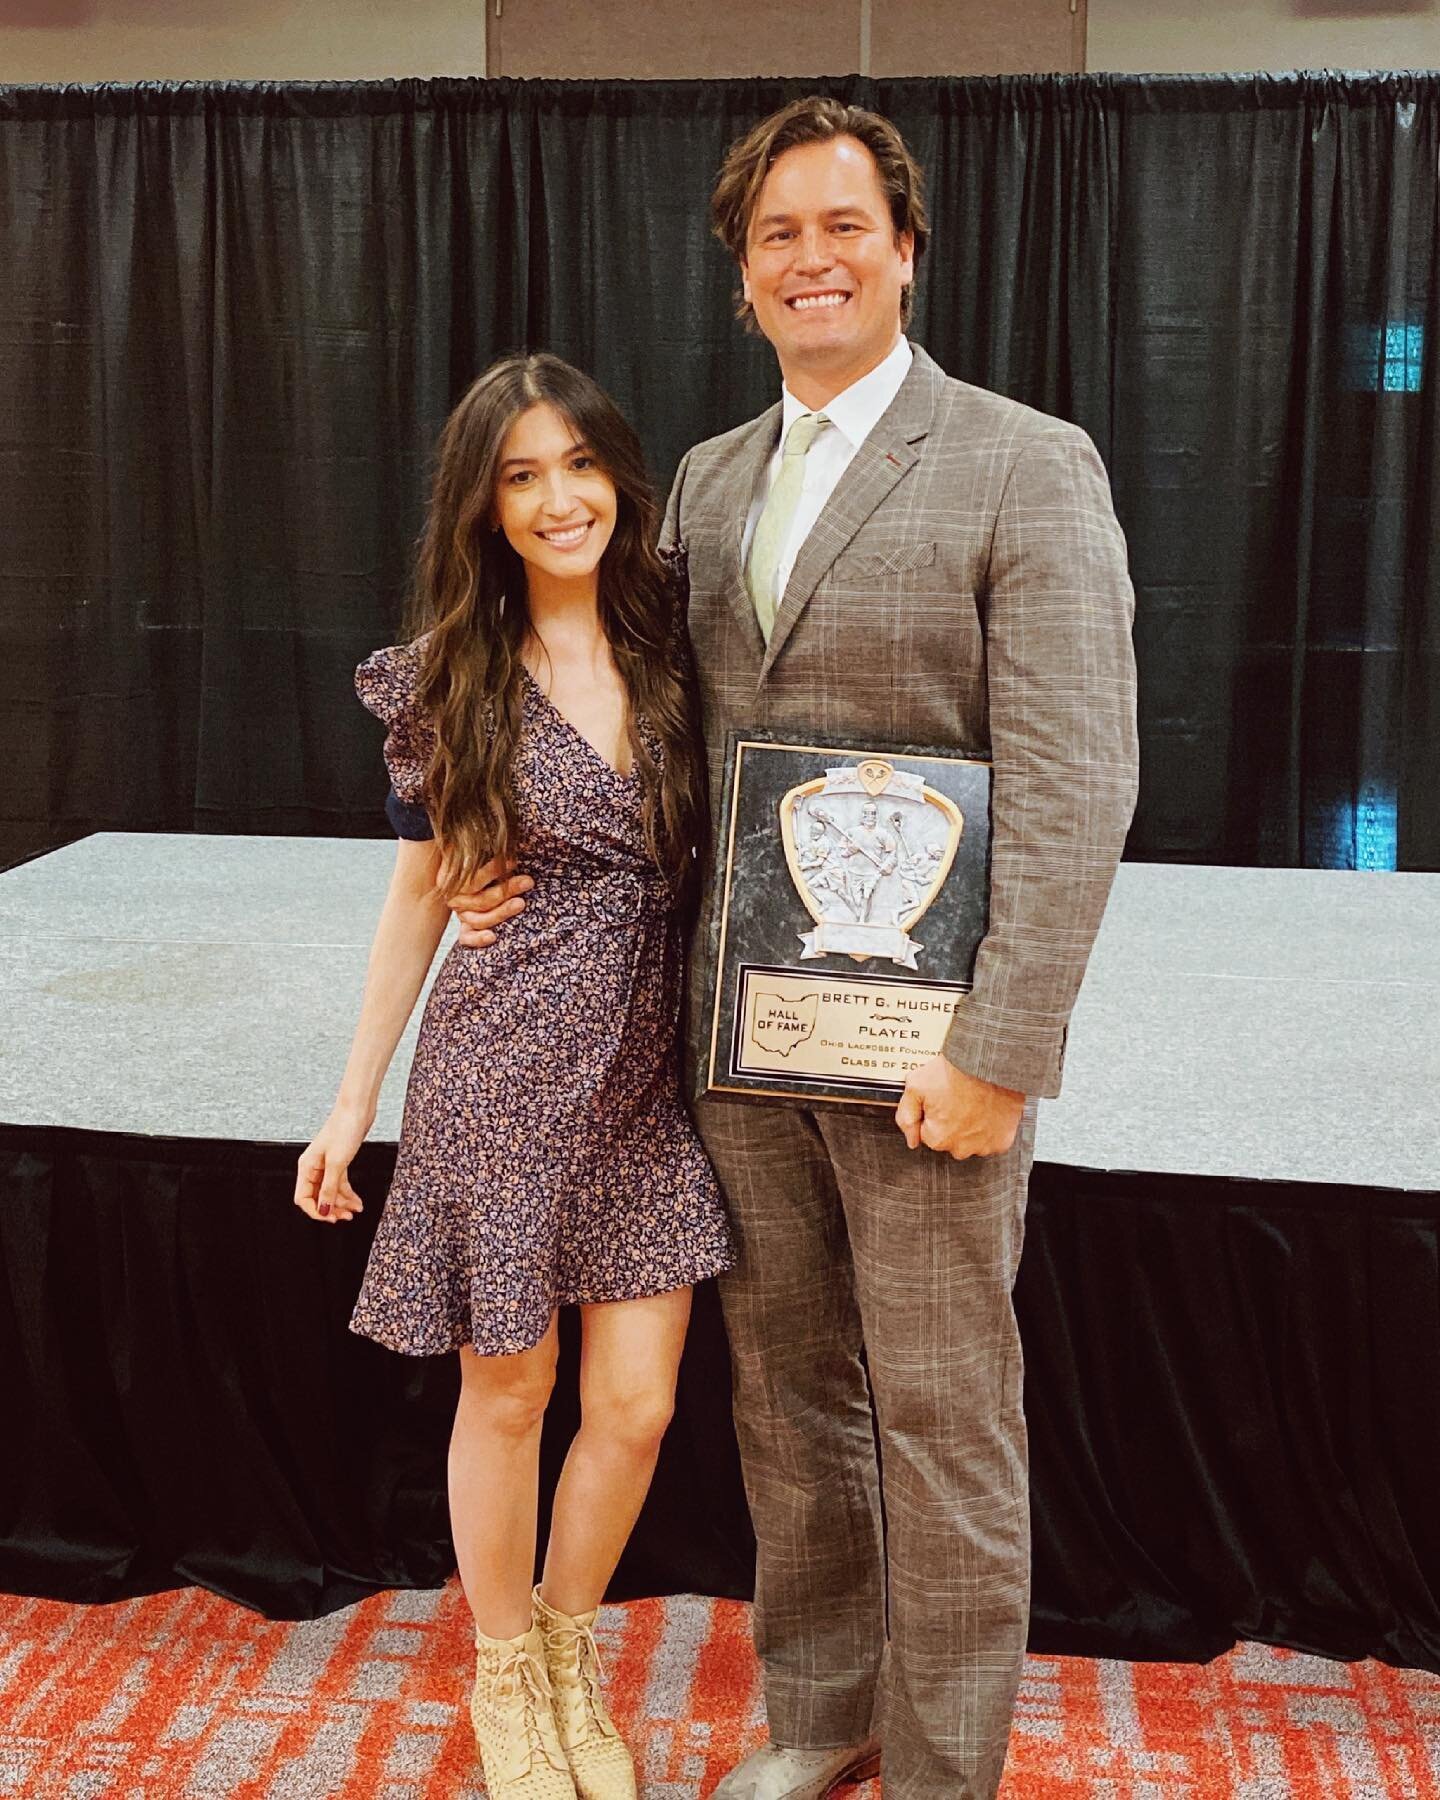 Could not be more proud of my amazing husband @bretthughes6 and his induction into the lacrosse hall of fame this weekend! Over the past 12 years I have been so incredibly inspired watching him play at the highest level and coach incredible teams, an